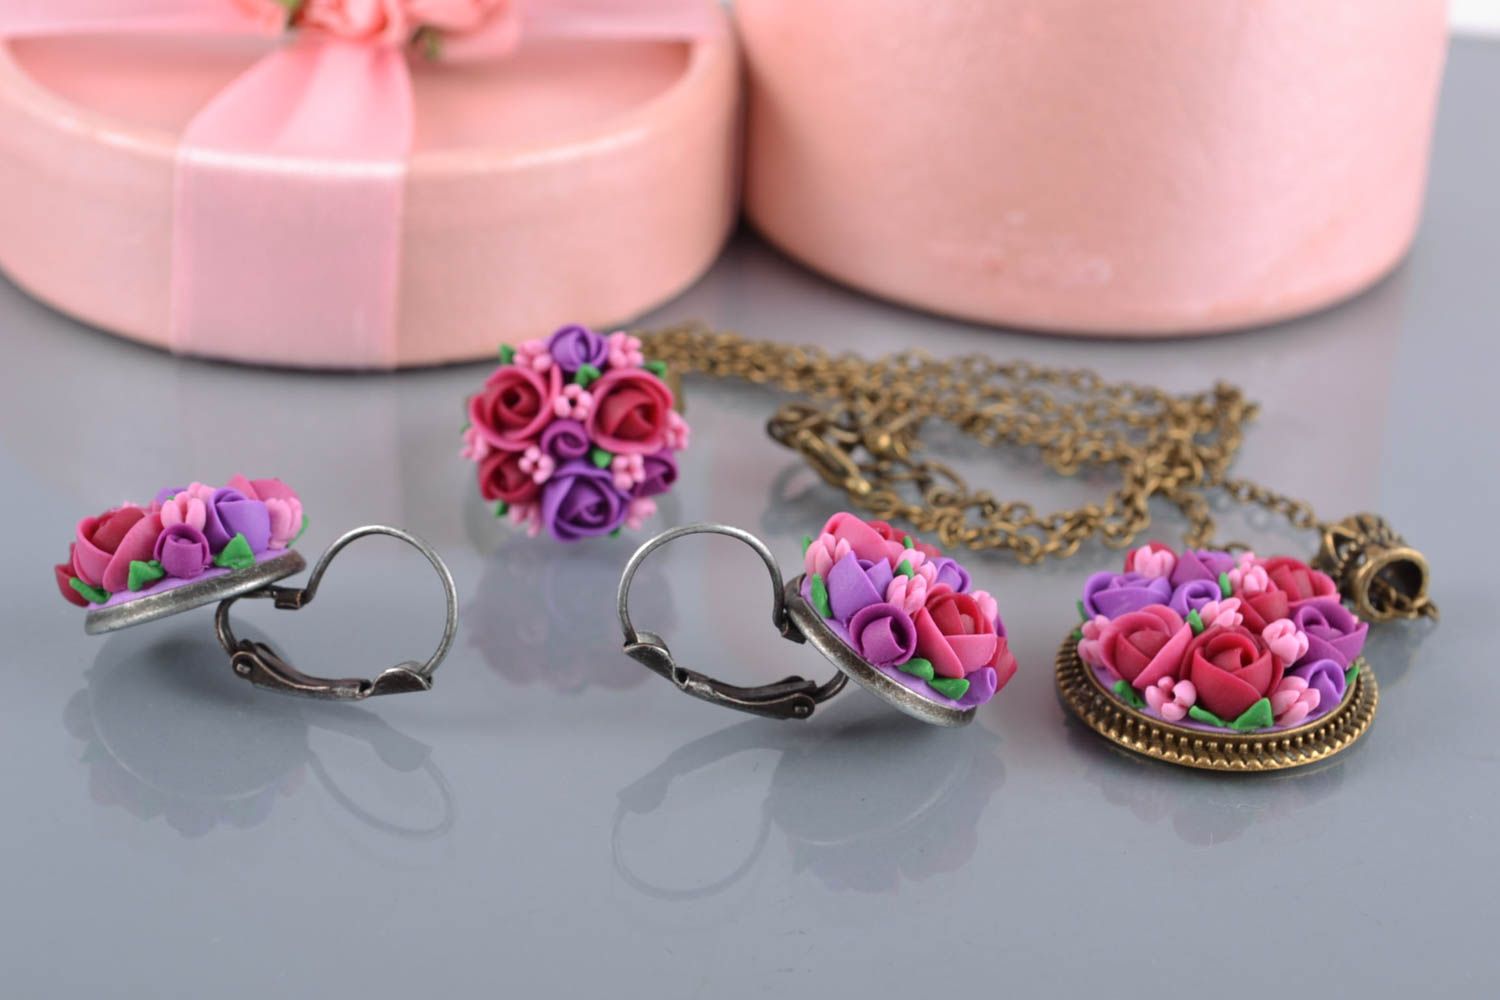 Handmade polymer clay jewelry set pendant earrings and ring photo 1